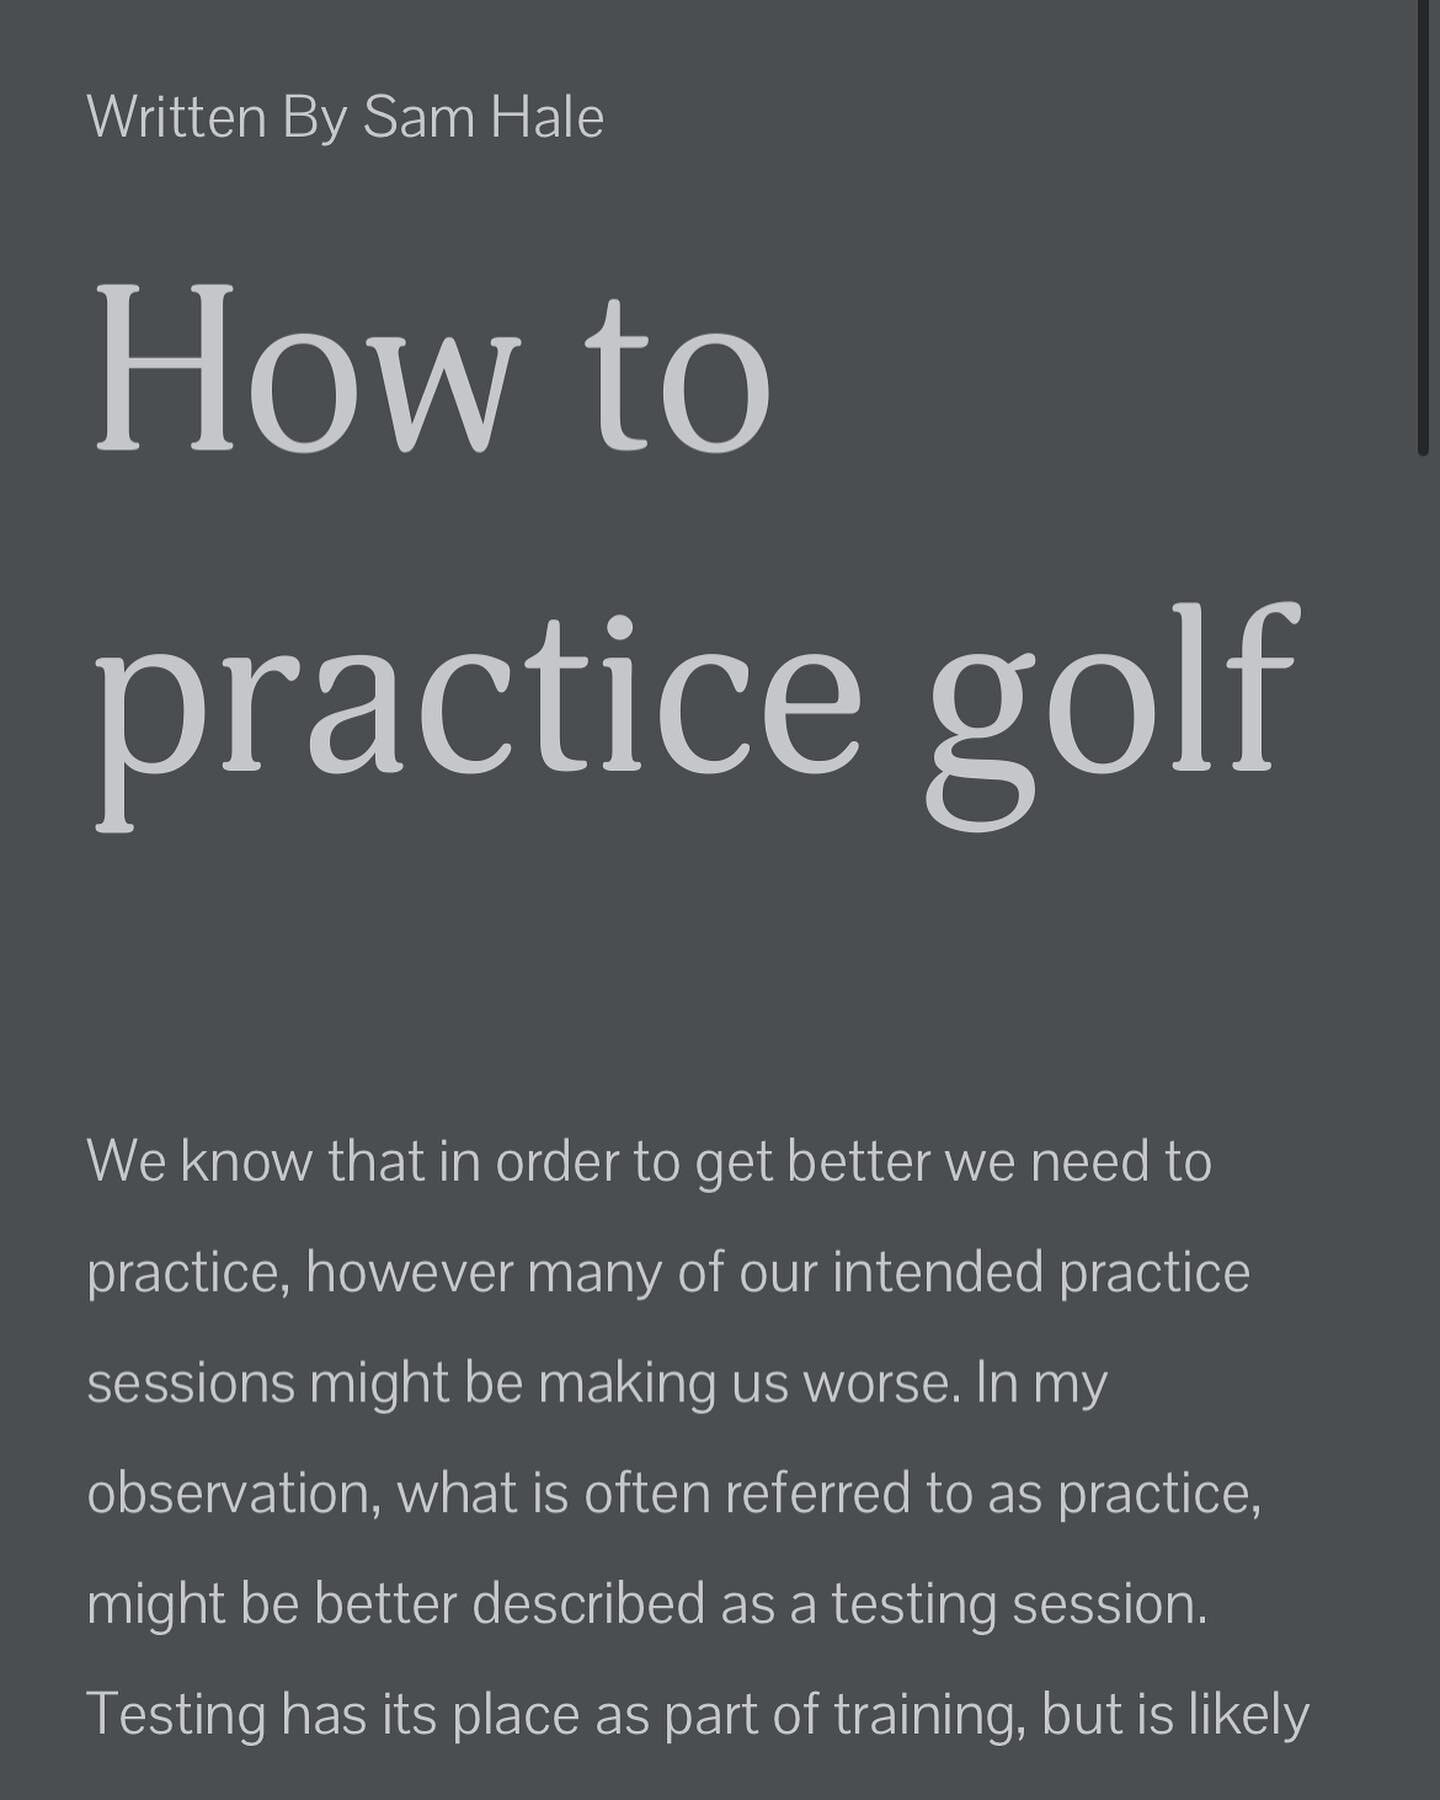 Expressing some thoughts on the best way to practice. Check it out www.samhalegolf.com/articles/howtopracticegolf